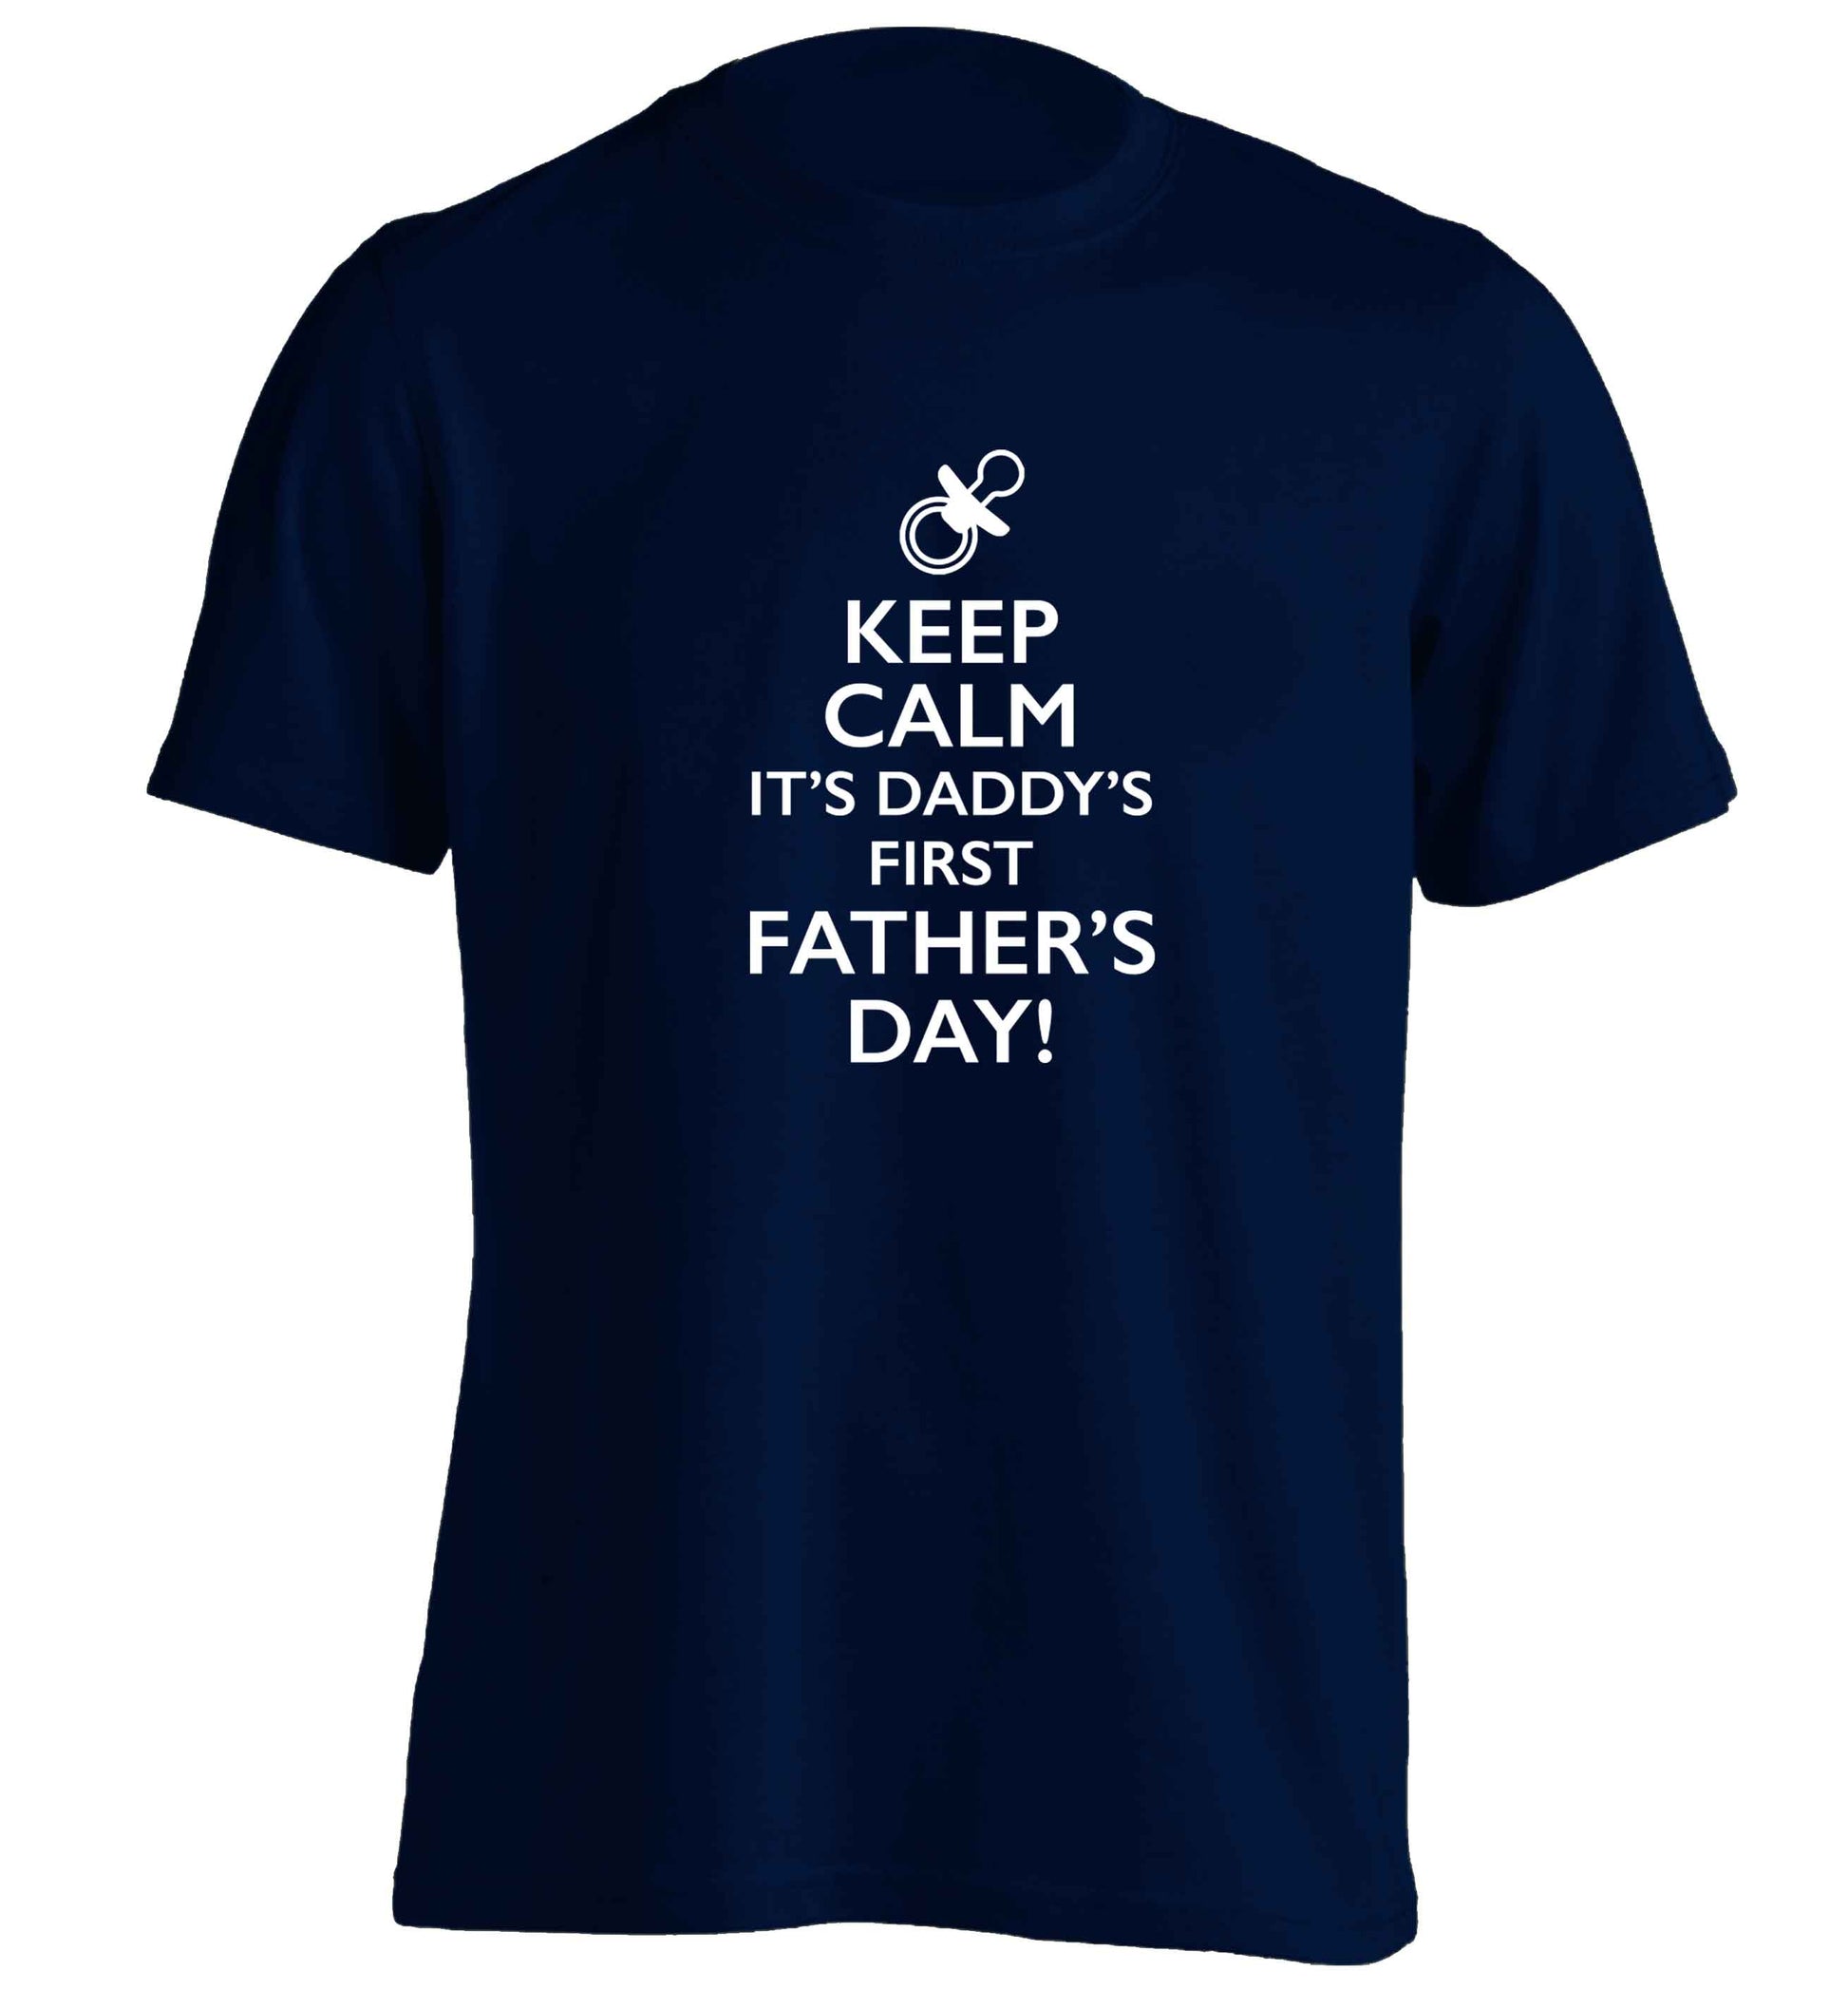 Keep calm it's daddys first father's day adults unisex navy Tshirt 2XL